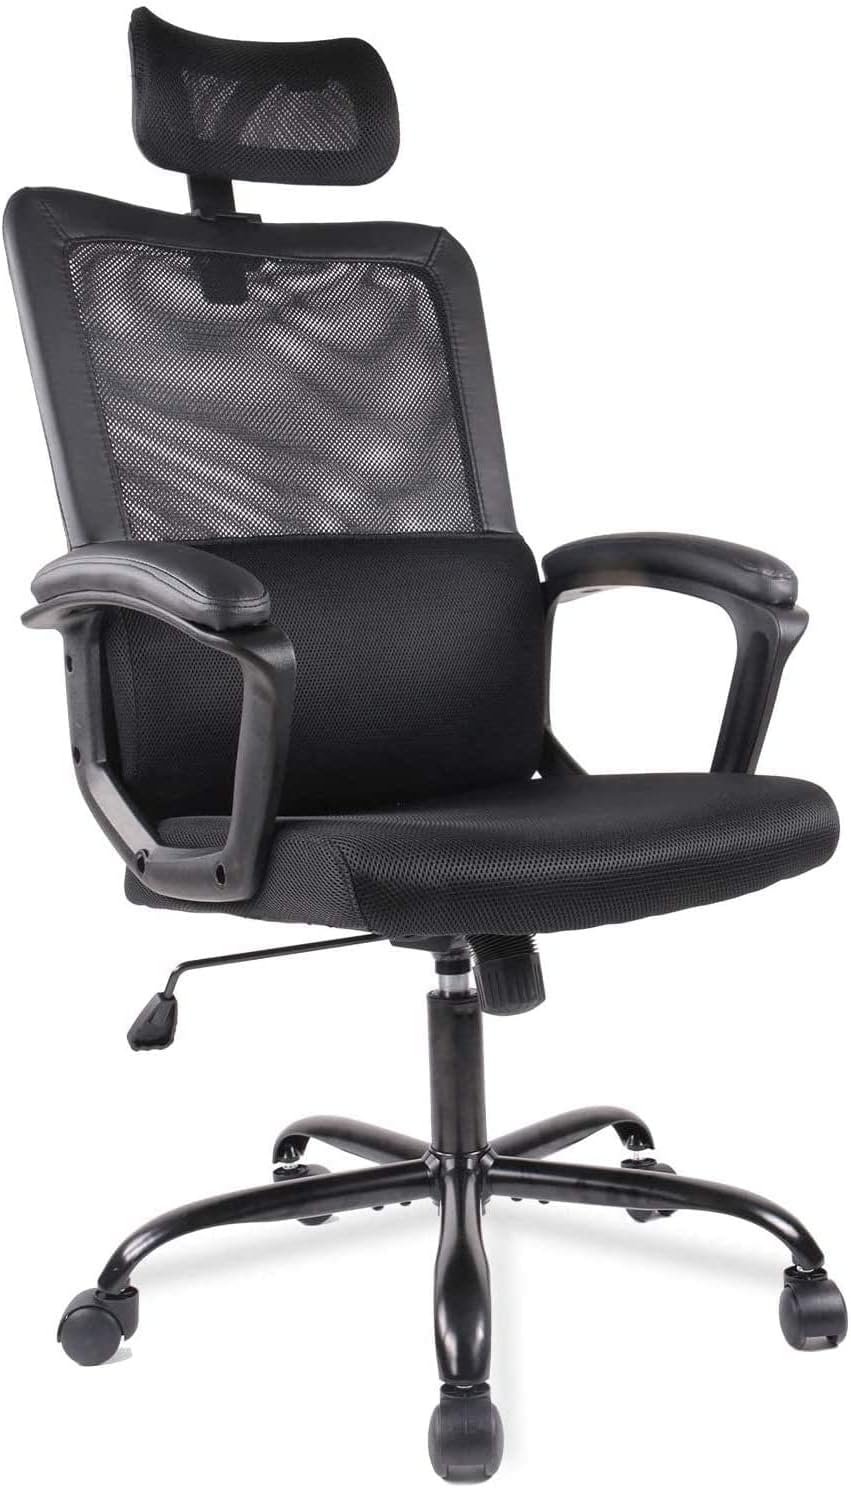 SMUG Office Chair, Ergonomic Mesh Home Office Computer Chair with Lumbar Support/Adjustable Headrest/Armrest and Wheels/Mesh High Back/Swivel Rolling (Black)